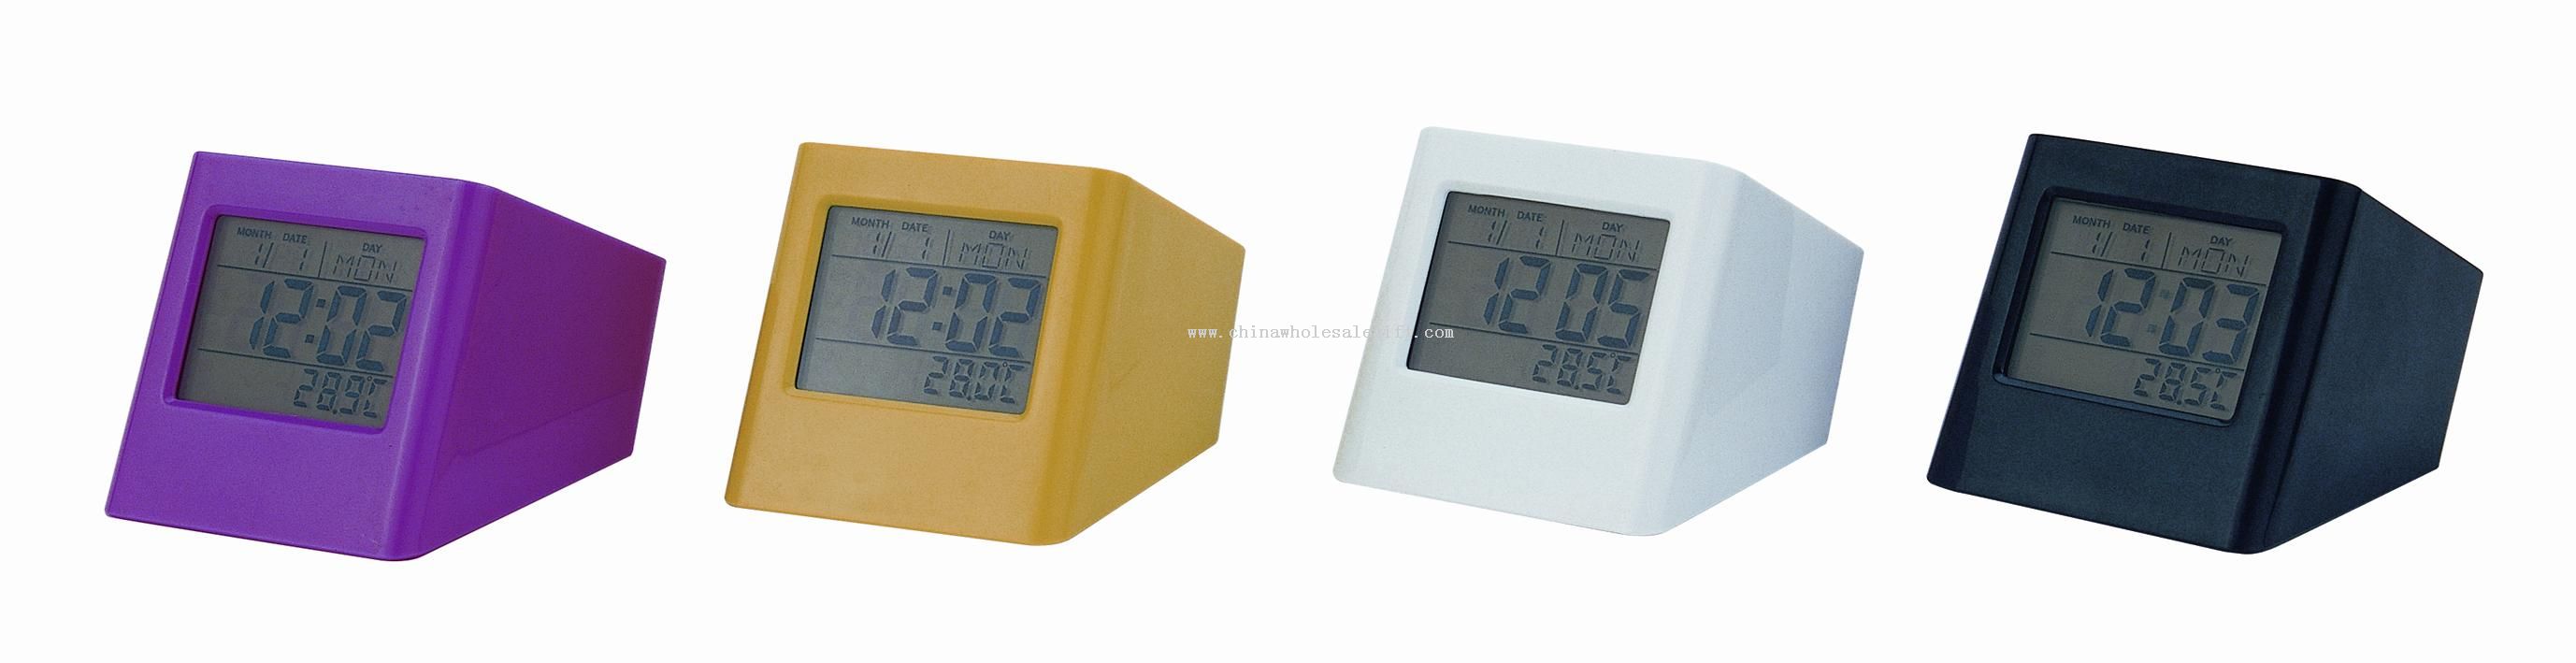 Thermometer World Time Calendar